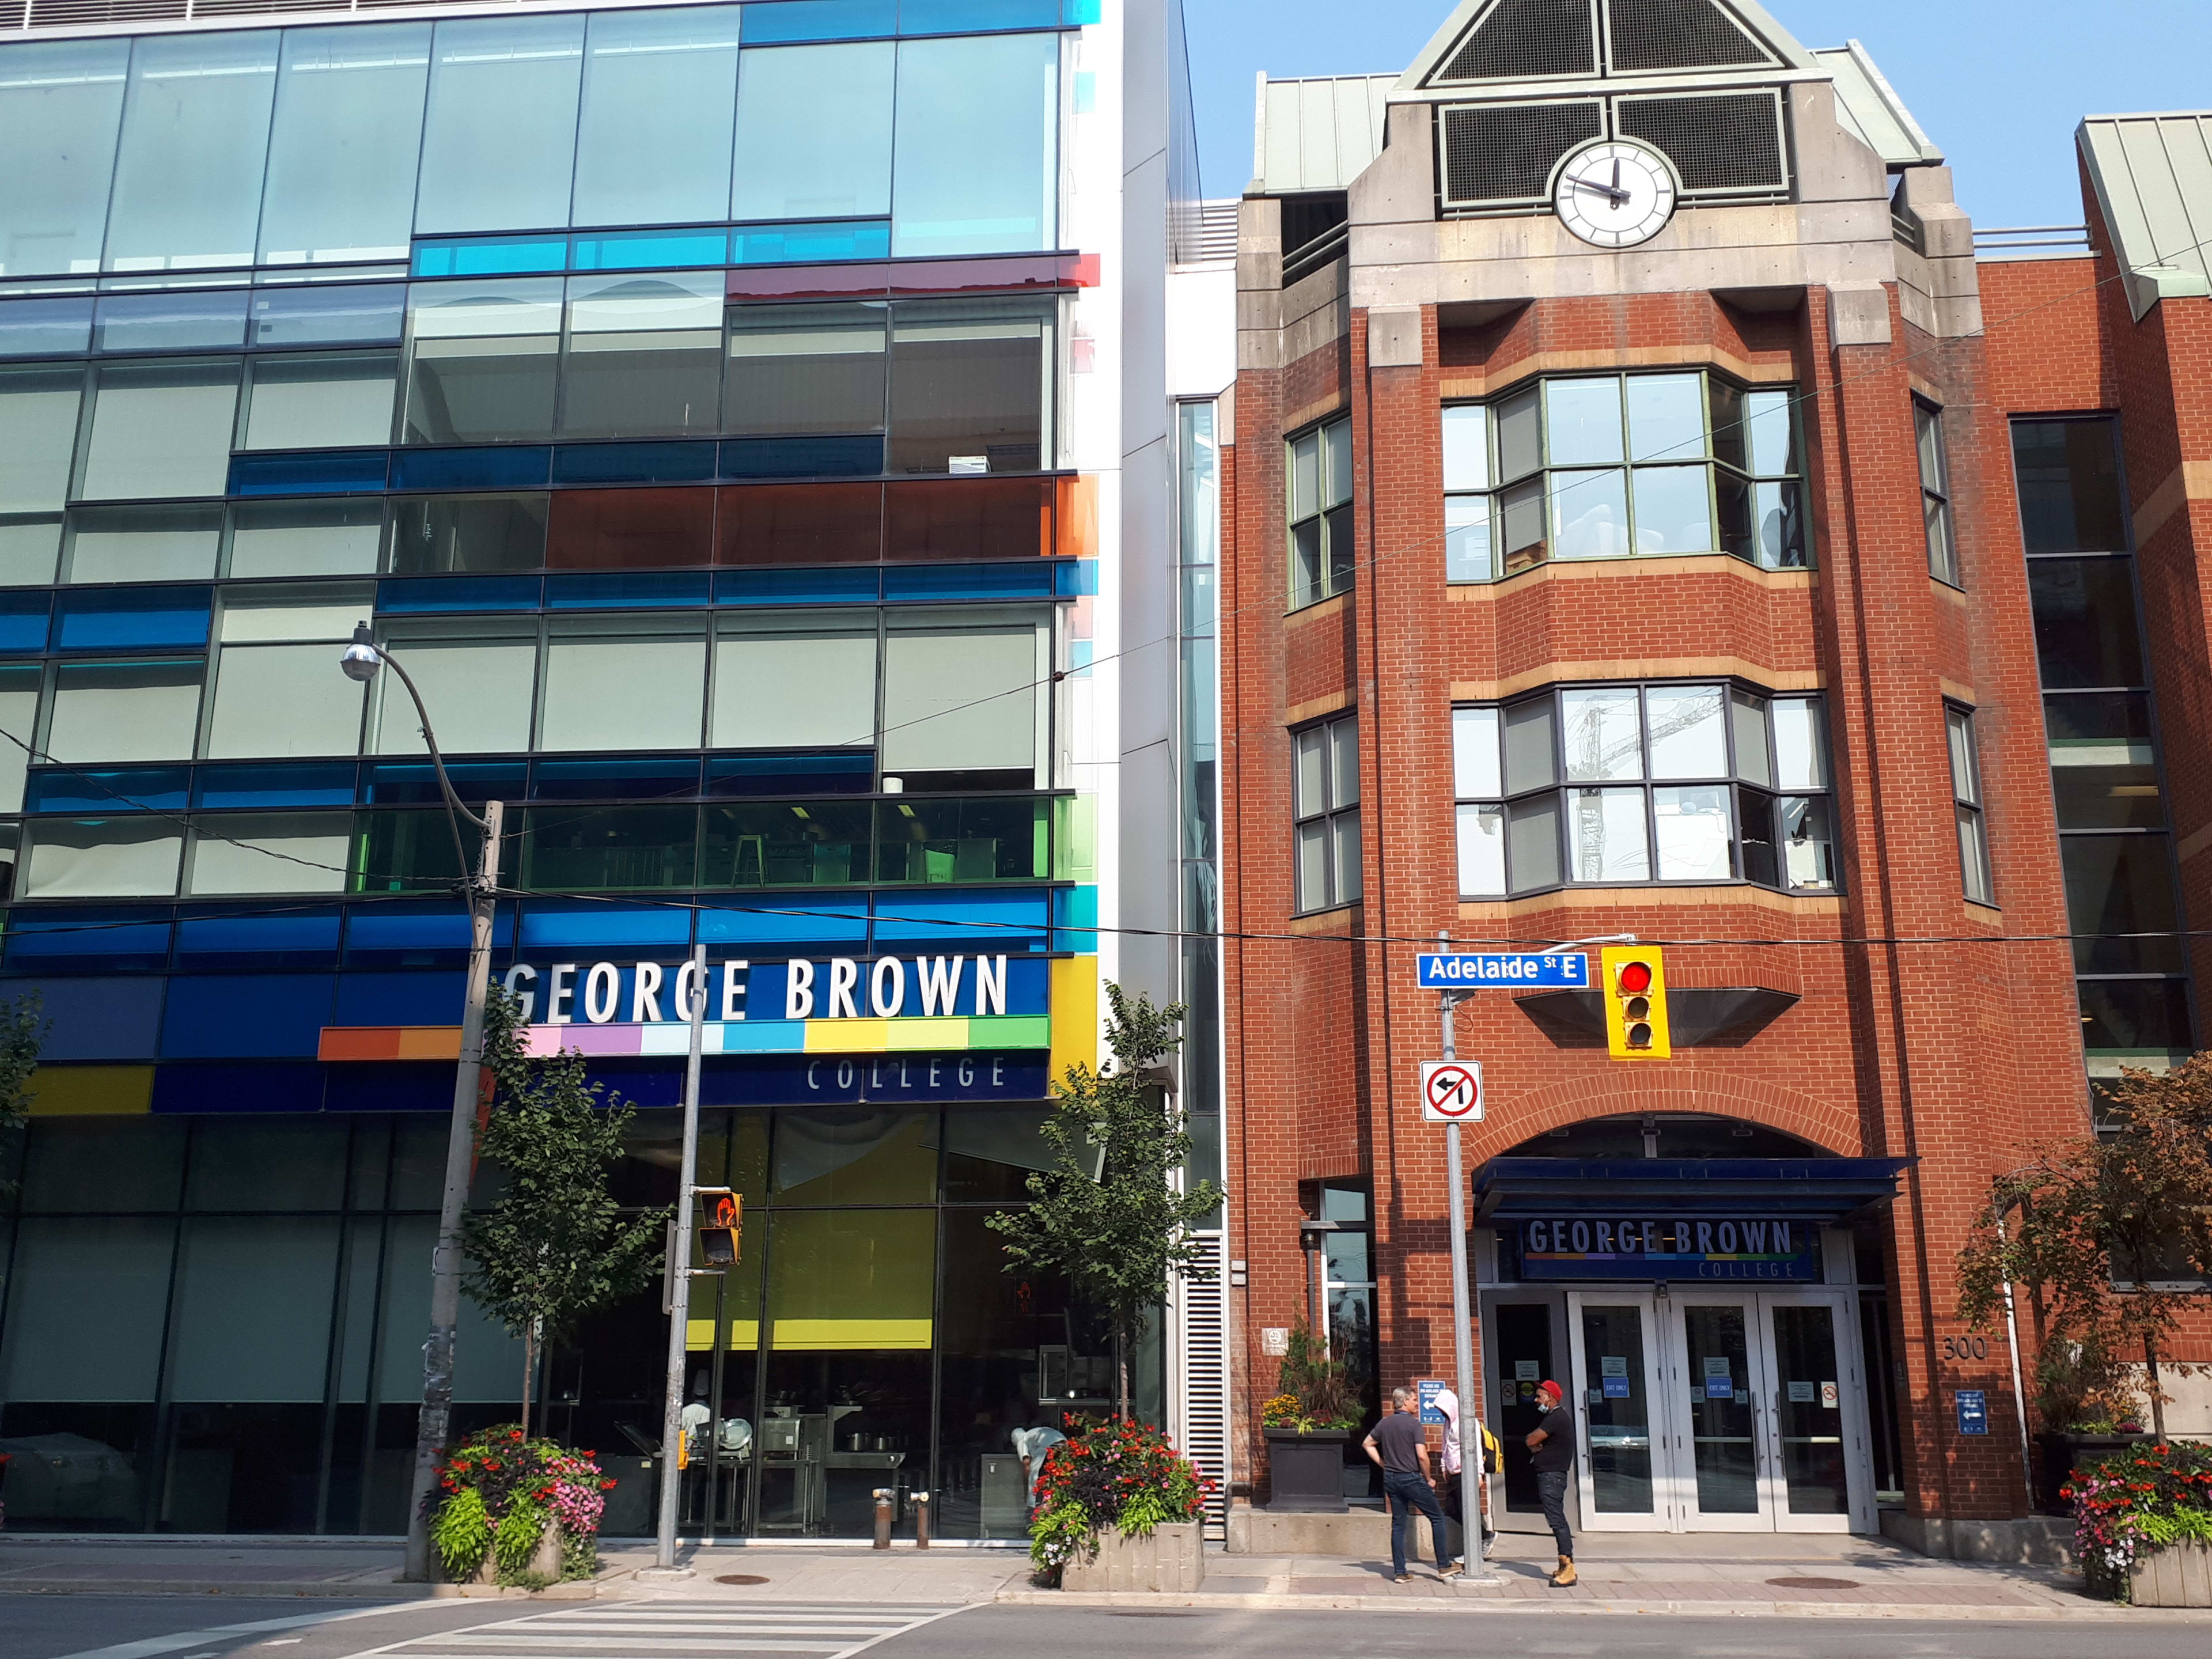 A building that is part of George Brown College is pictured.